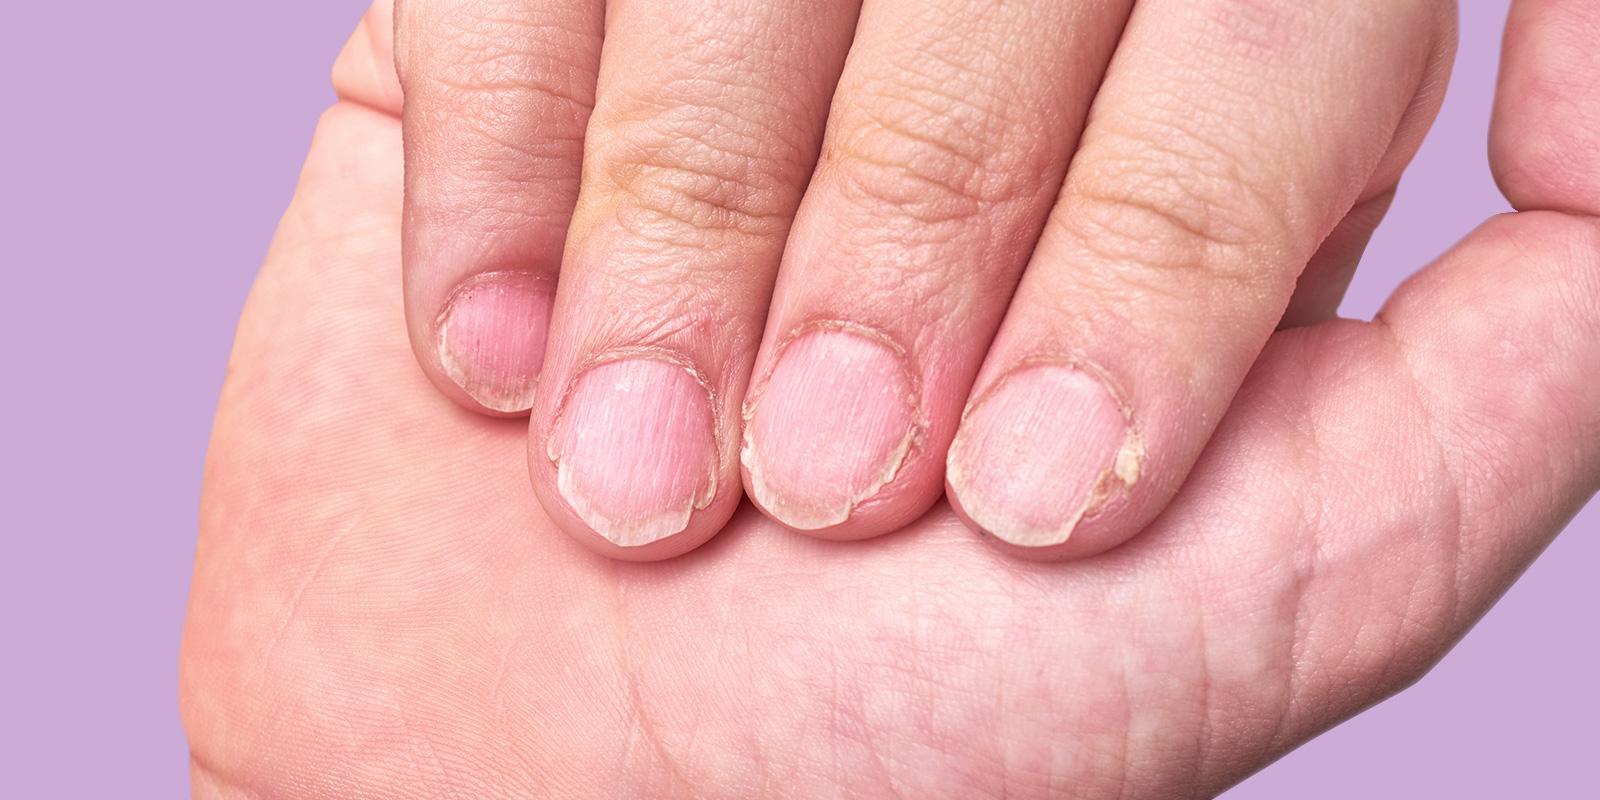 5 of the Most Common Nail Diseases